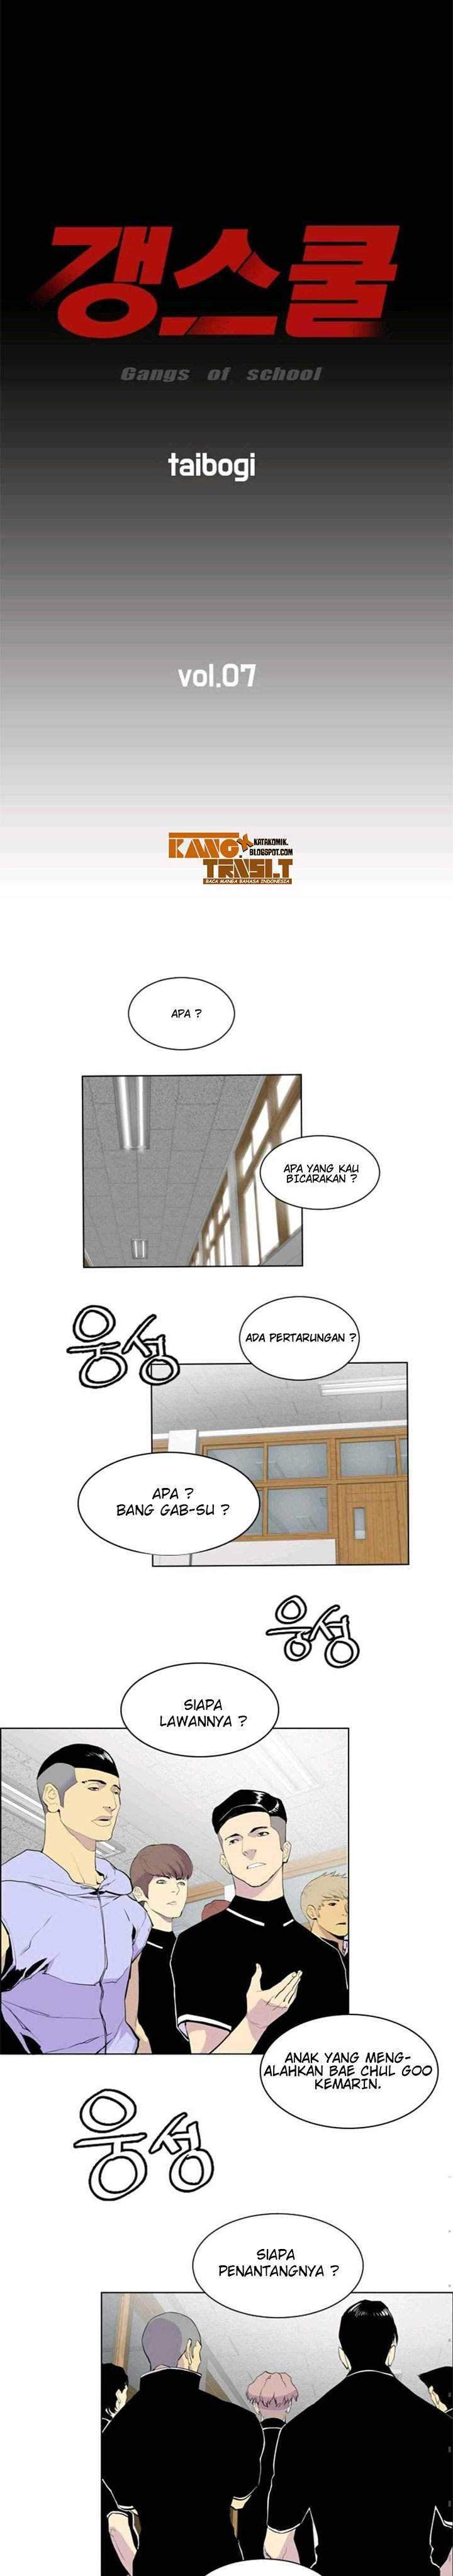 Gang Of School Chapter 7